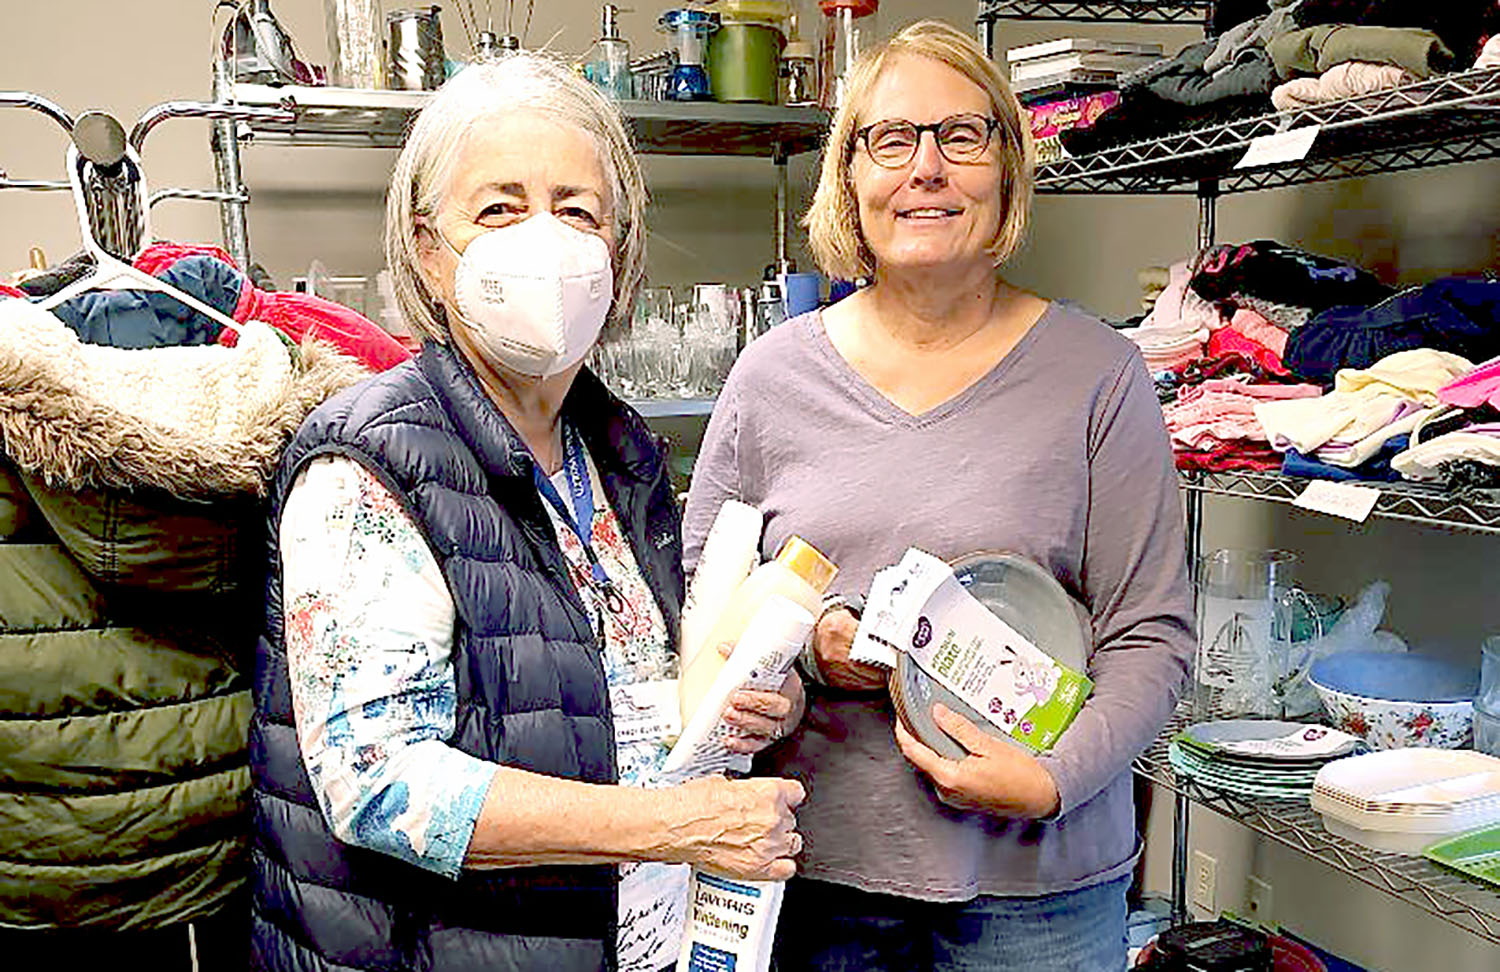 Two women organizing household items in the Hope Chest, a supply area for those once homeless.